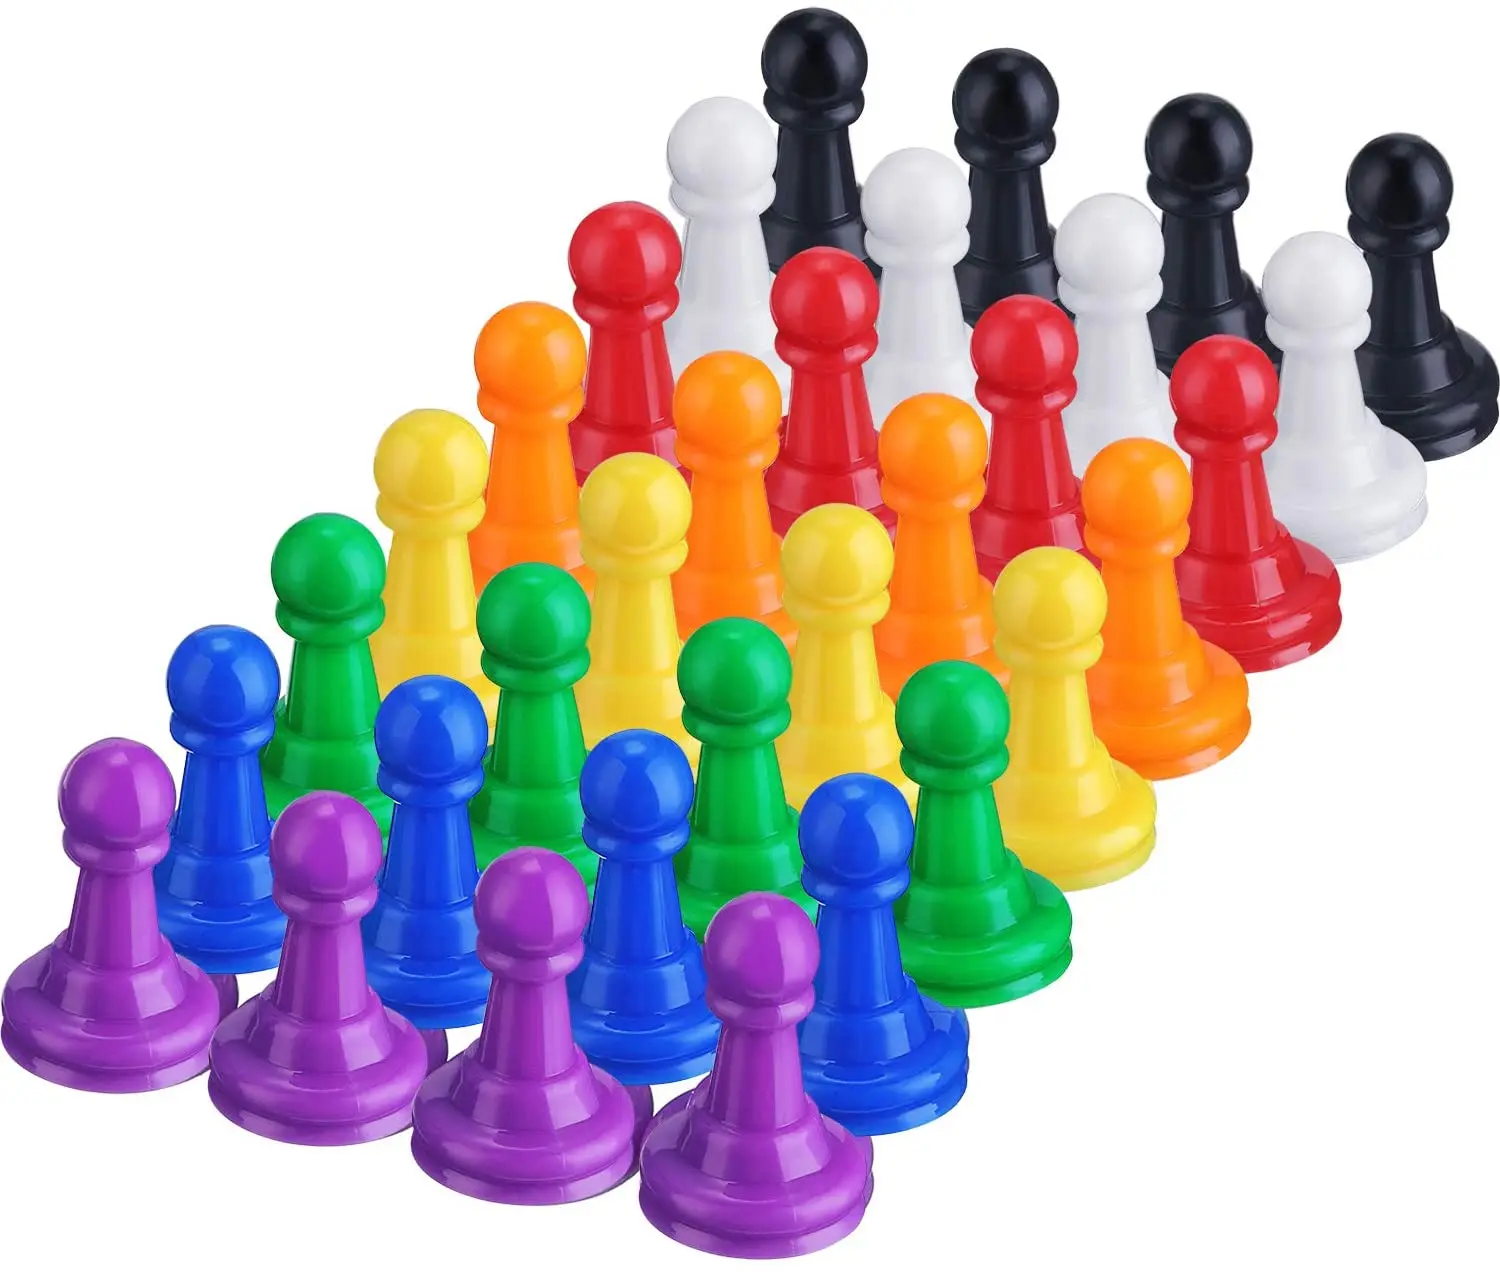 NEW Koplow Ball Pawn Game Pawns Set of 8 Plastic Tokens Replacement Pieces 